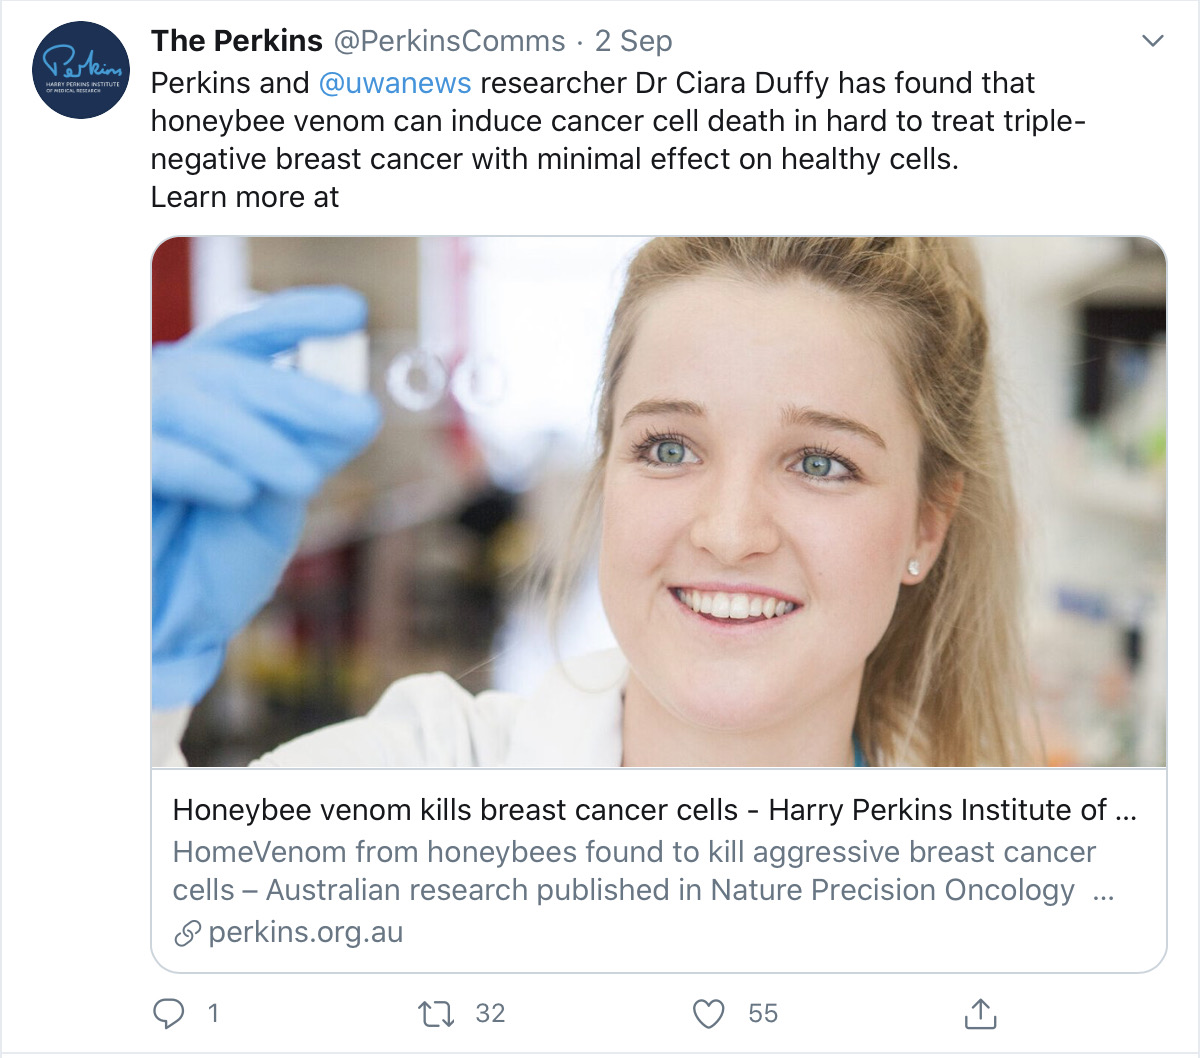 Duffy and her team tested both the venom itself and a synthetic version of a compound in the venom called melittin. They found that both were effective against triple-negative breast cancer and HER2-enriched breast cancer cells.